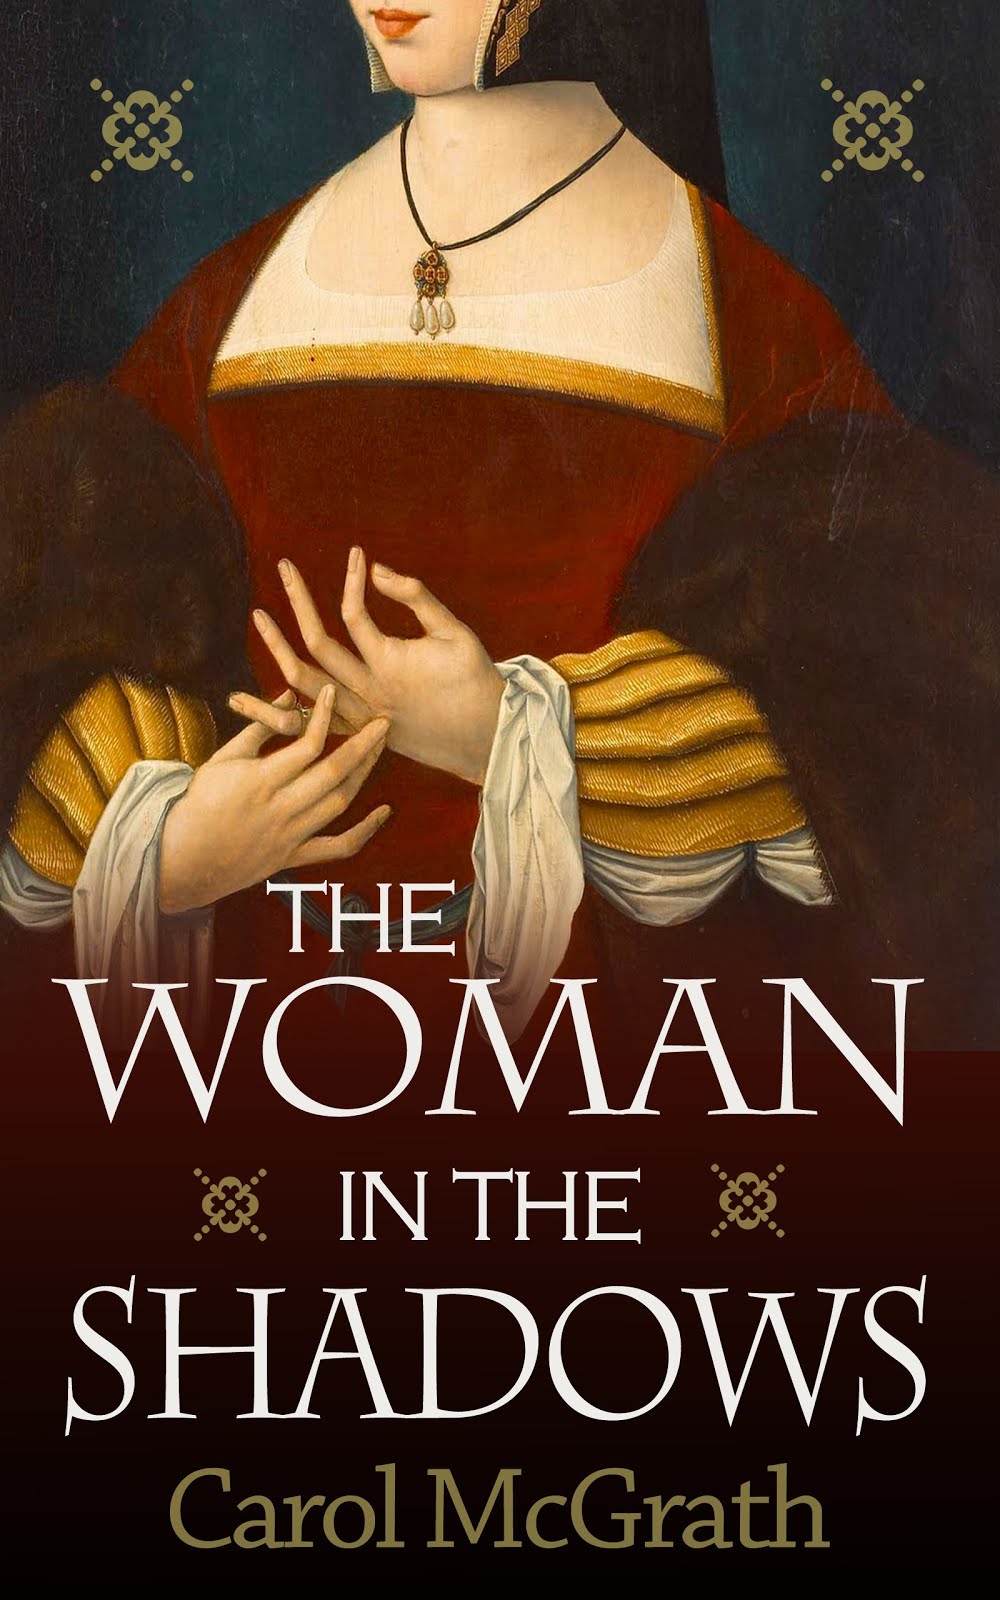 MY NEW BOOK - The Woman in the Shadows